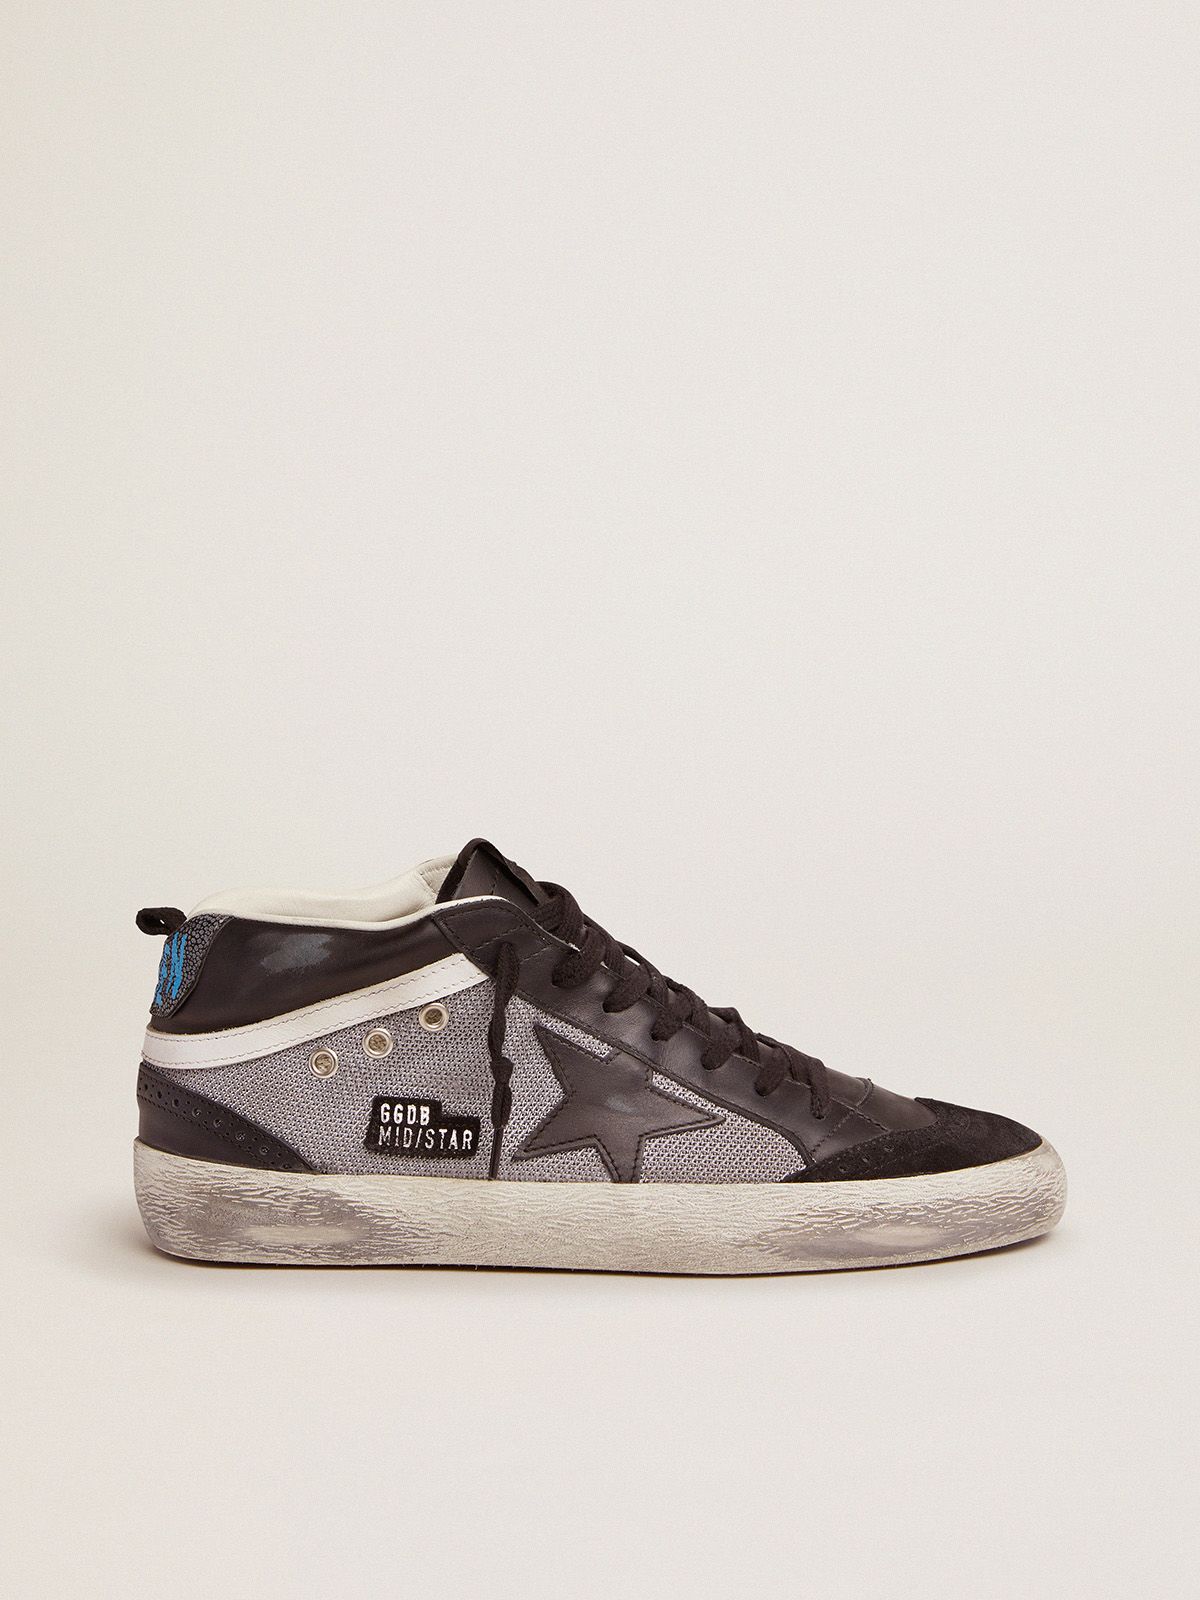 Golden Goose Sconto Uomo Mid Star sneakers in black leather and silver mesh